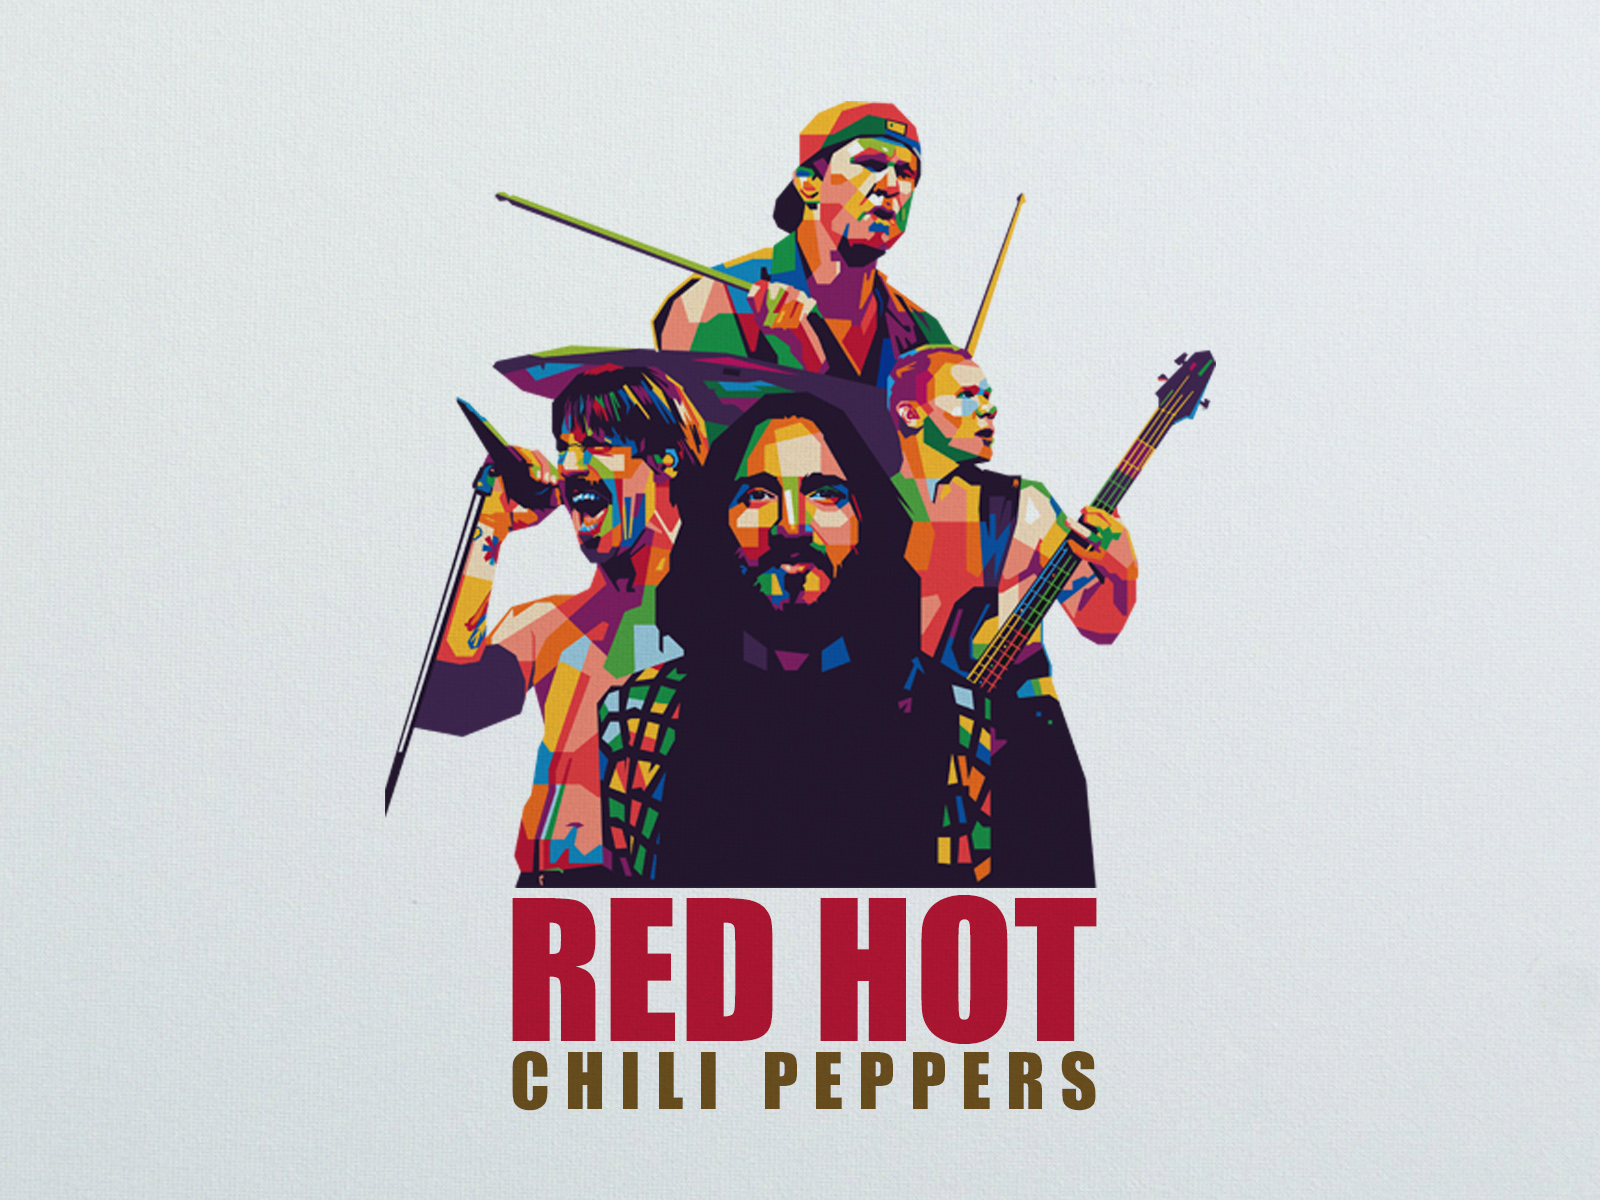 Red Chili Peppers by Nofa Aji Zatmiko on